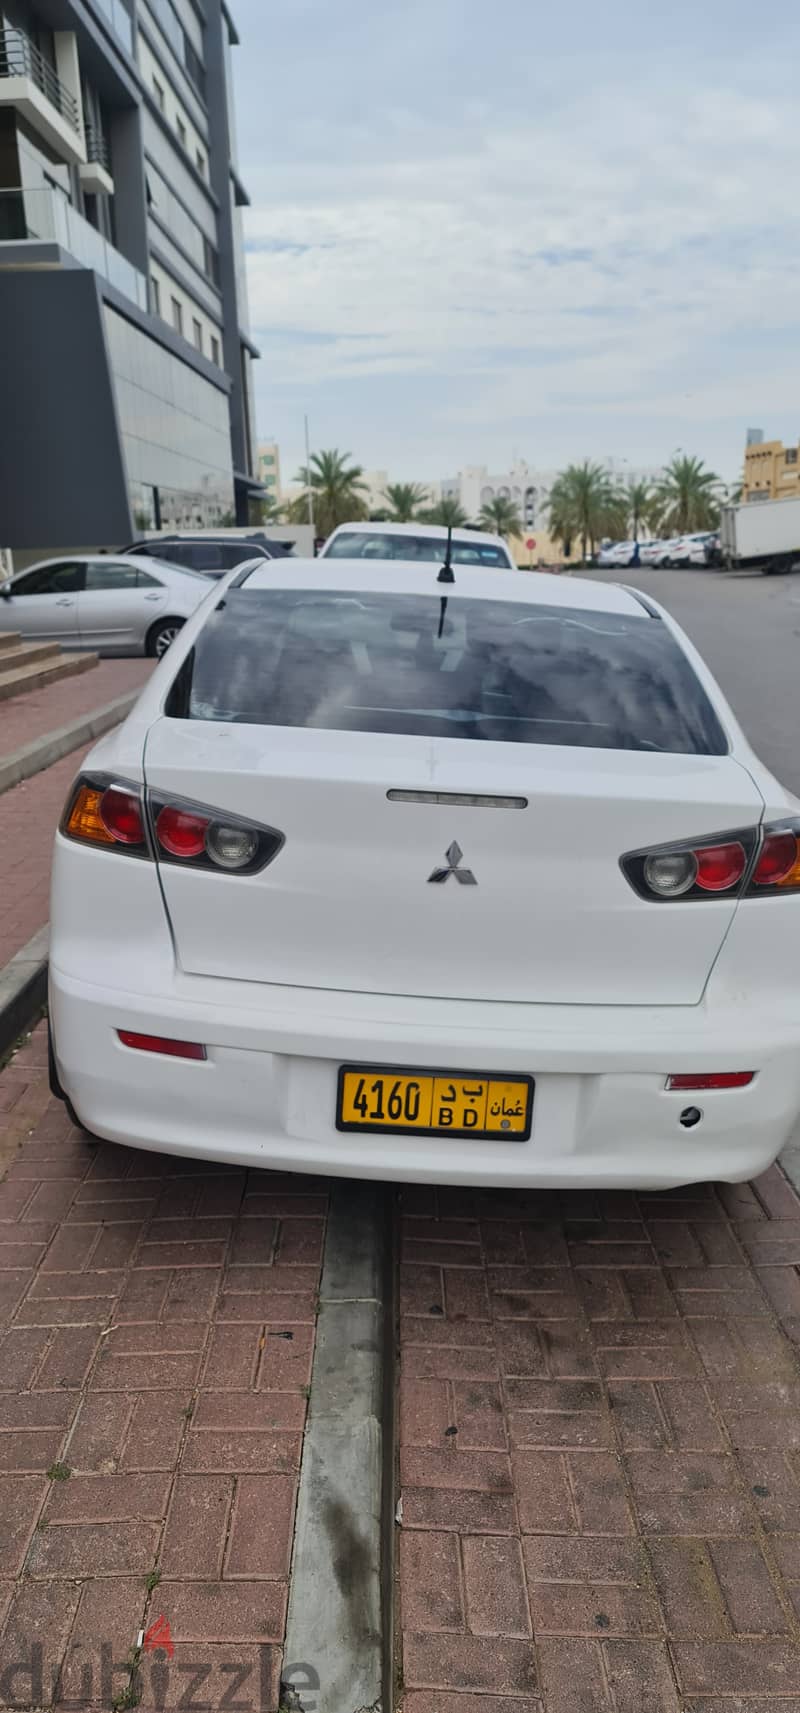 Lancer 2010 model ,very good condition, neat and clean 2